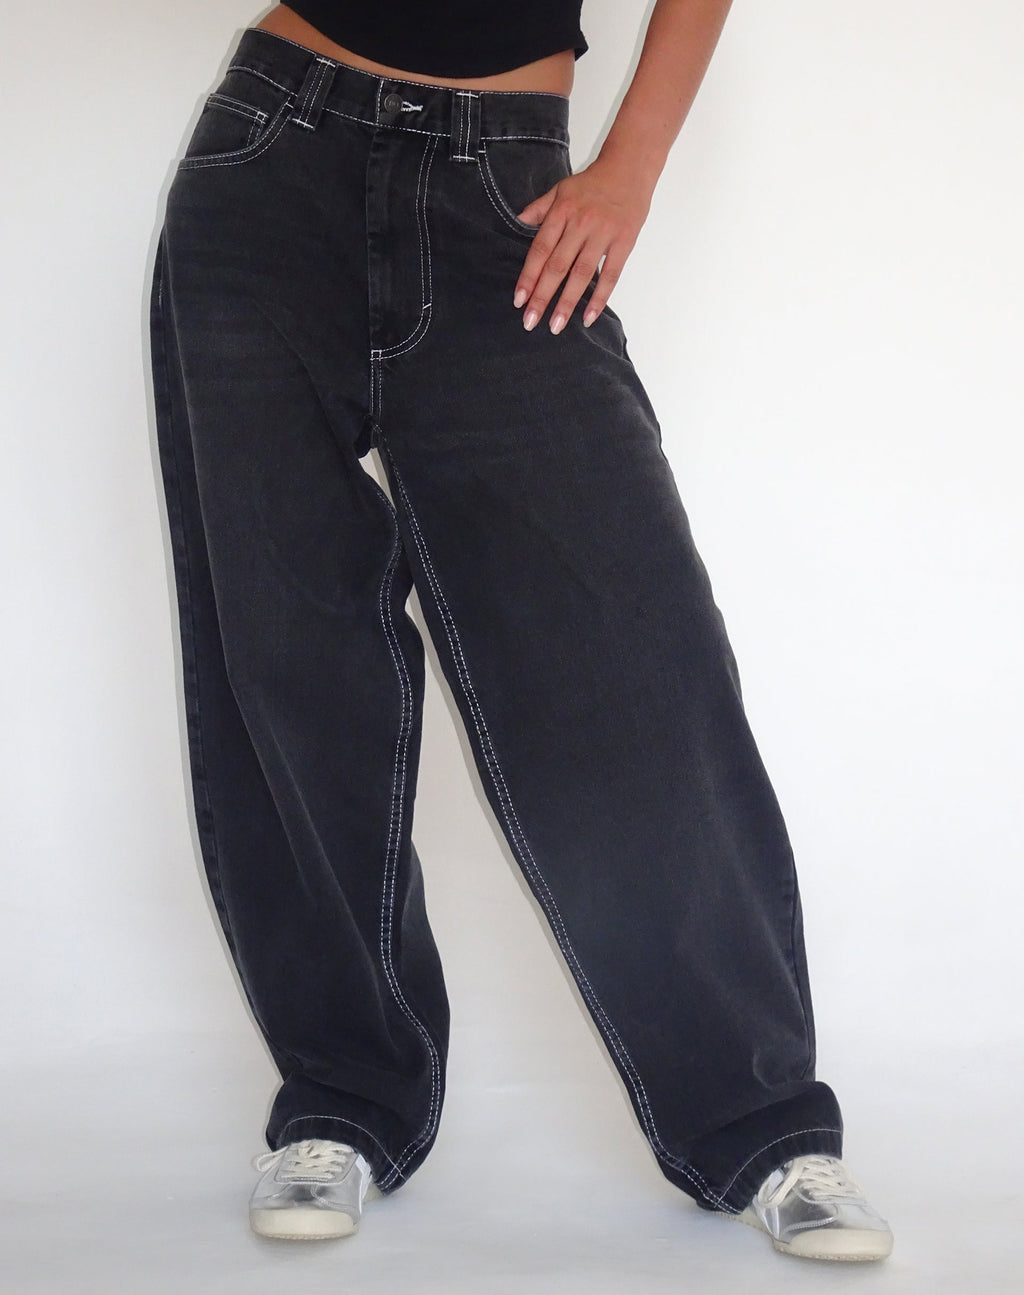 Skater Low Rise Jean in Vintage Black with White Top Stitch